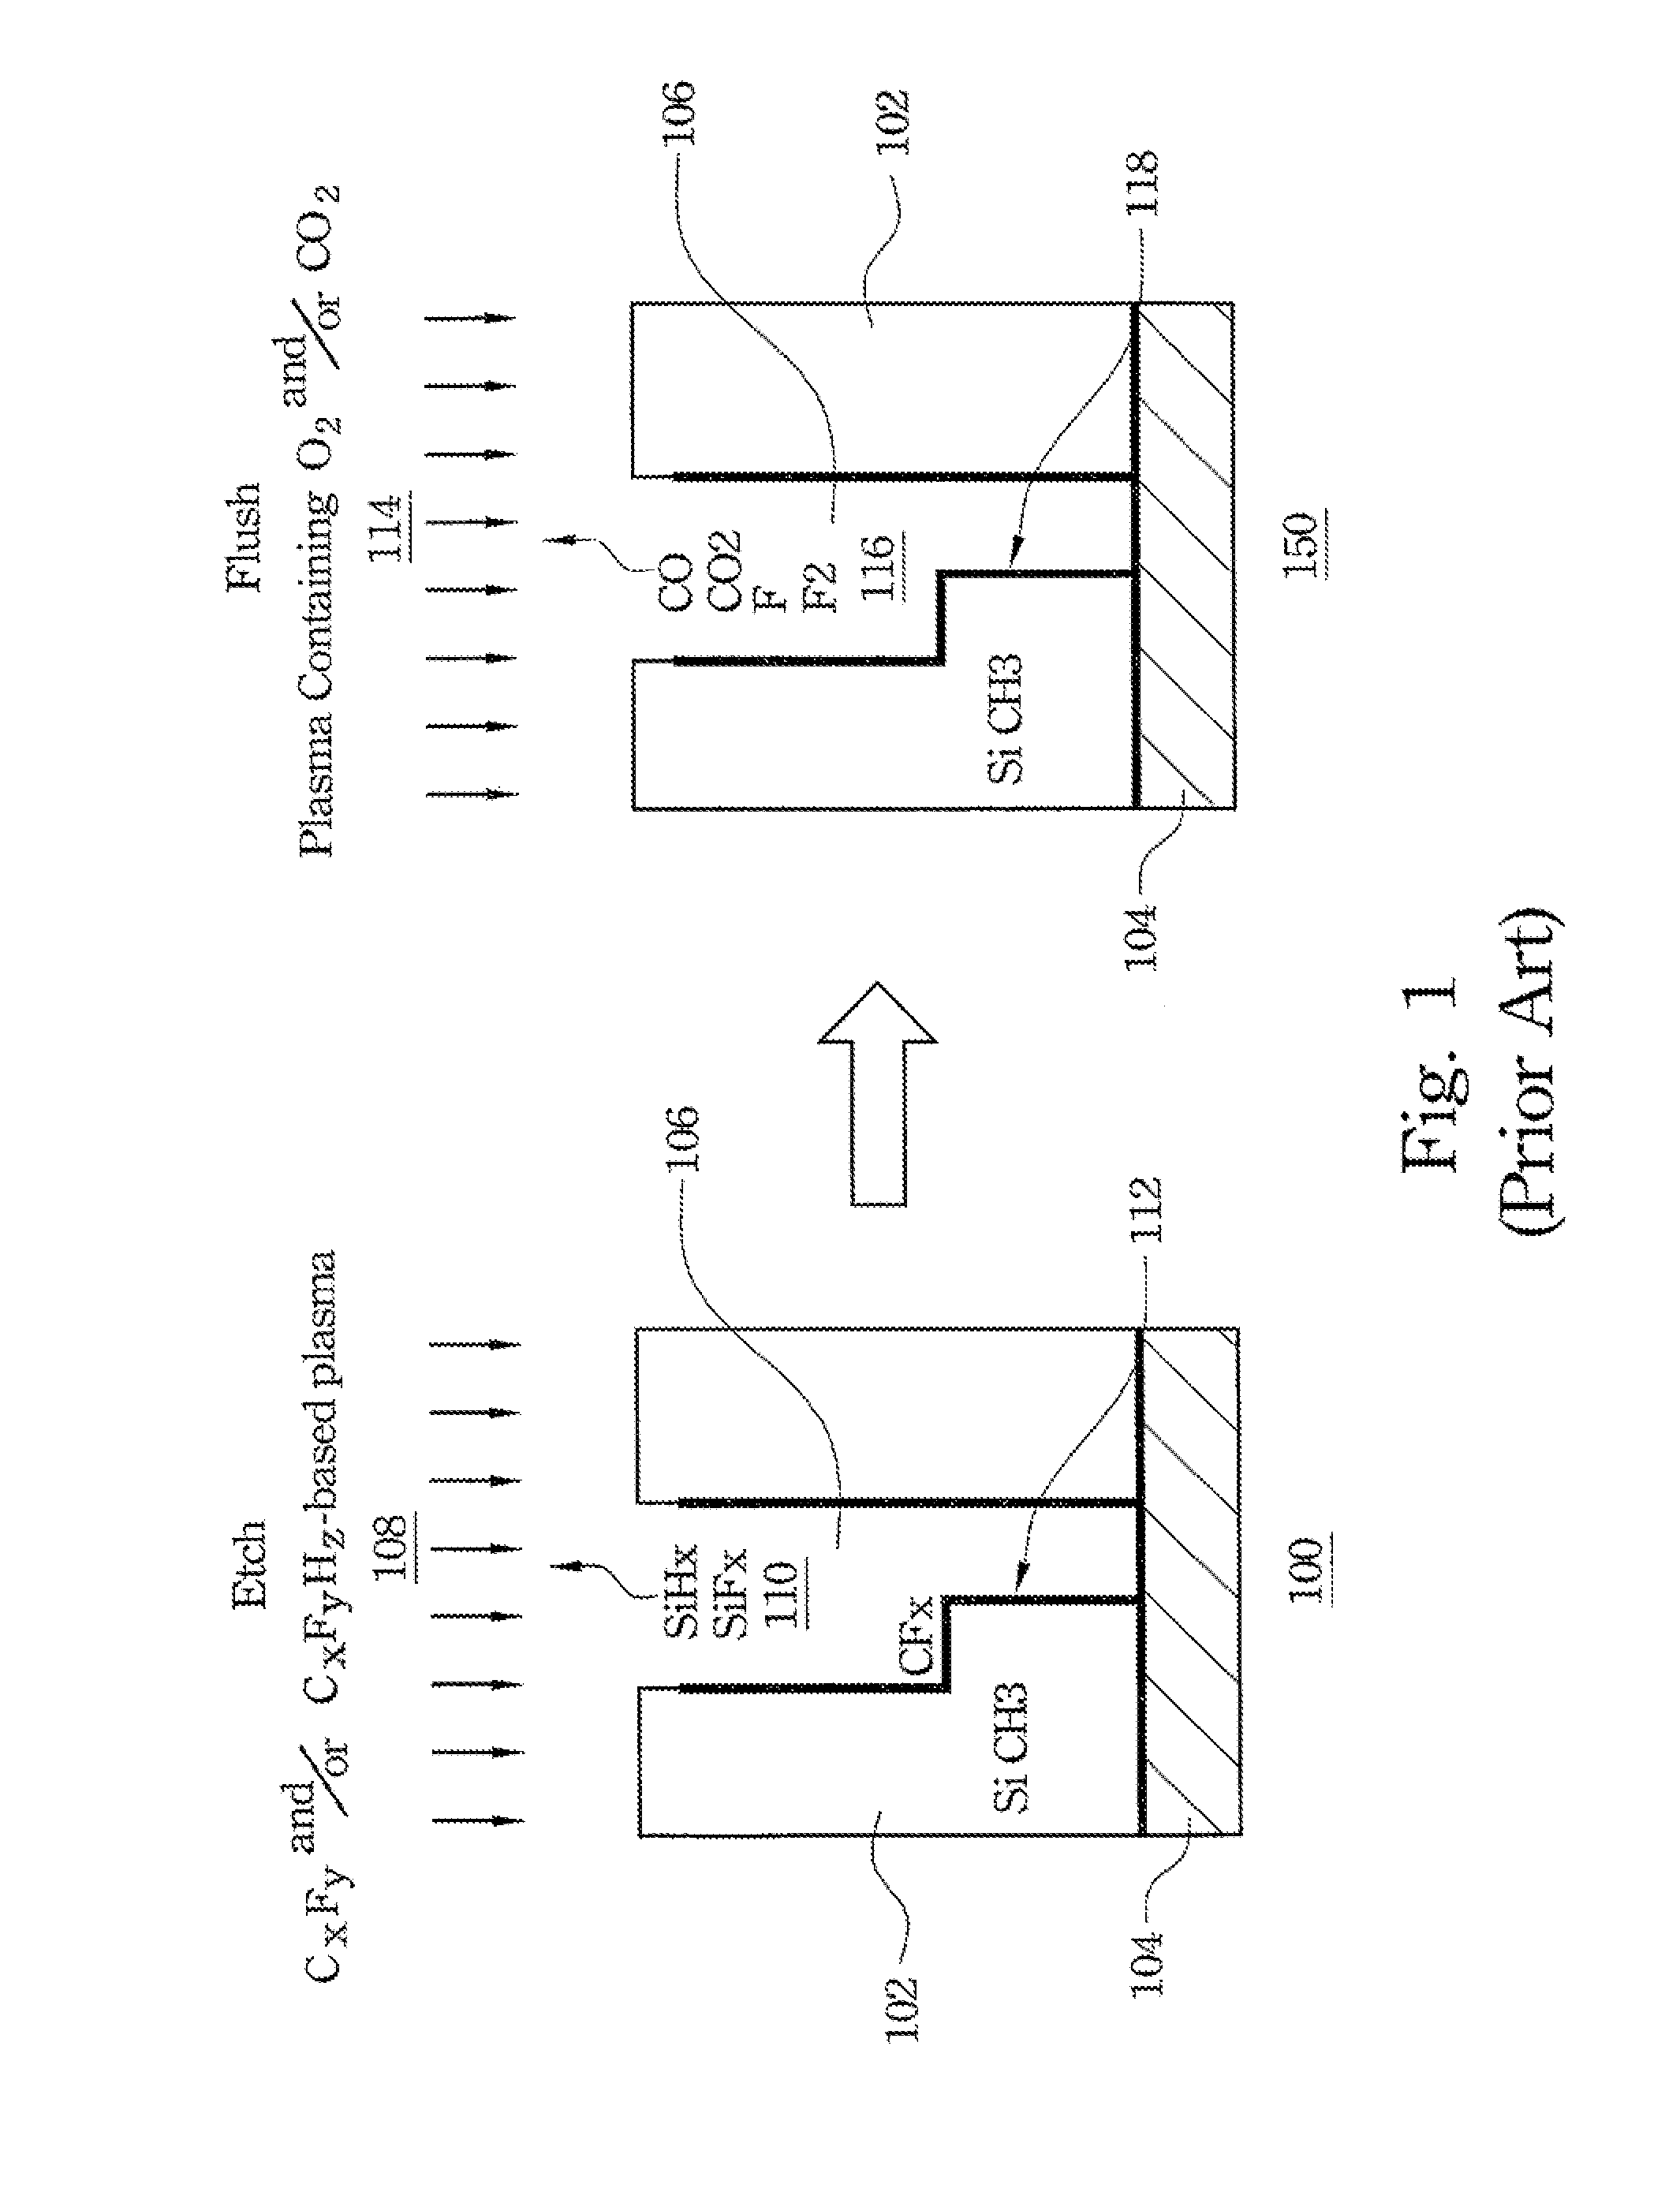 Method for fabricating low-k dielectric and Cu interconnect